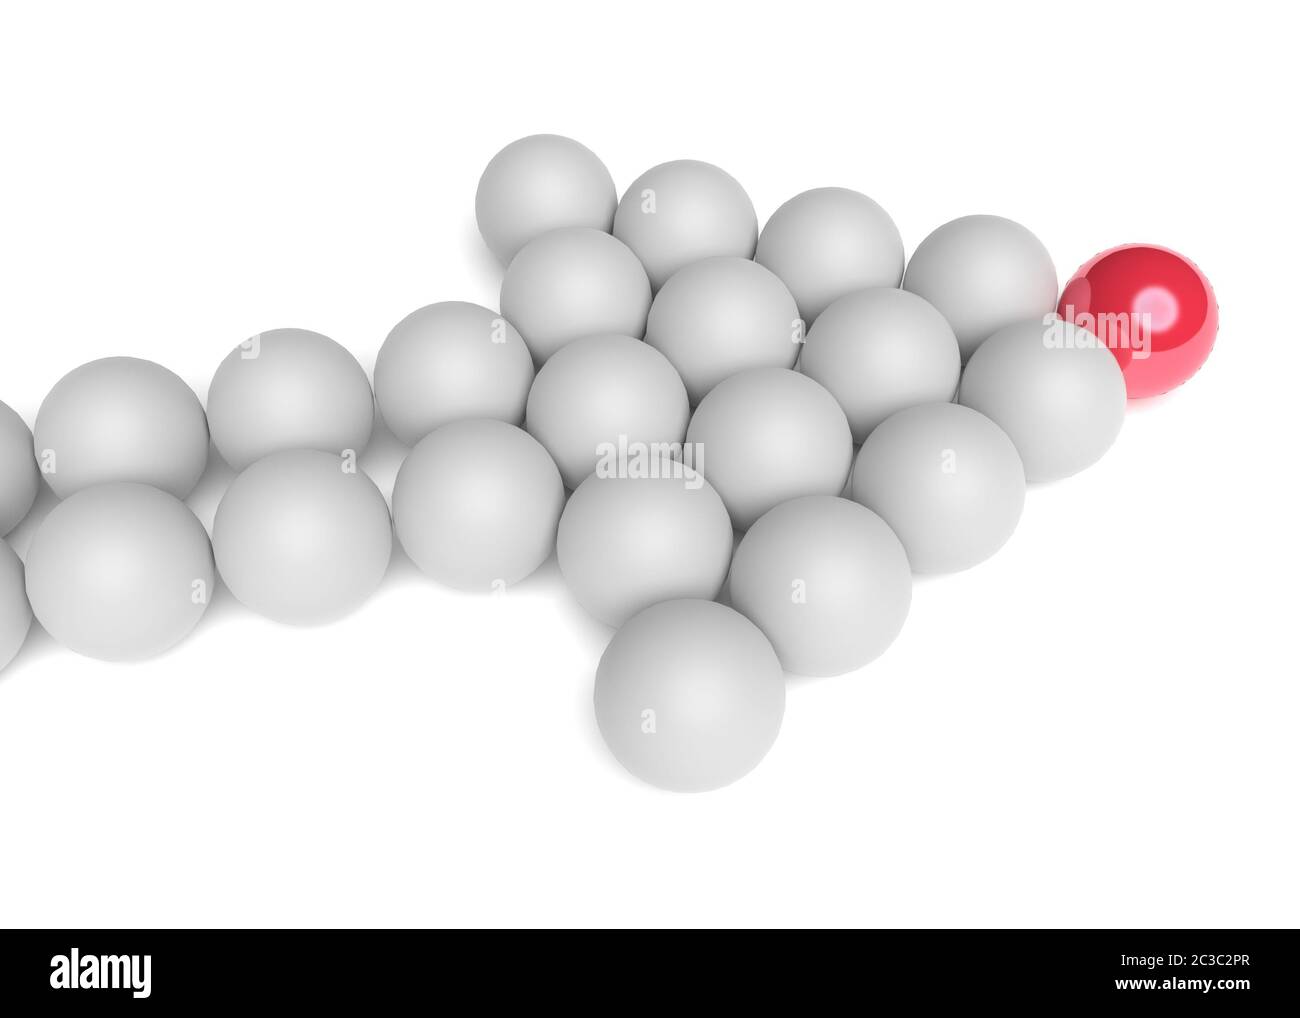 Business concepts of leader leads the team forward. Arrow made of balls. Ahead is a red ball. 3d rendering Stock Photo